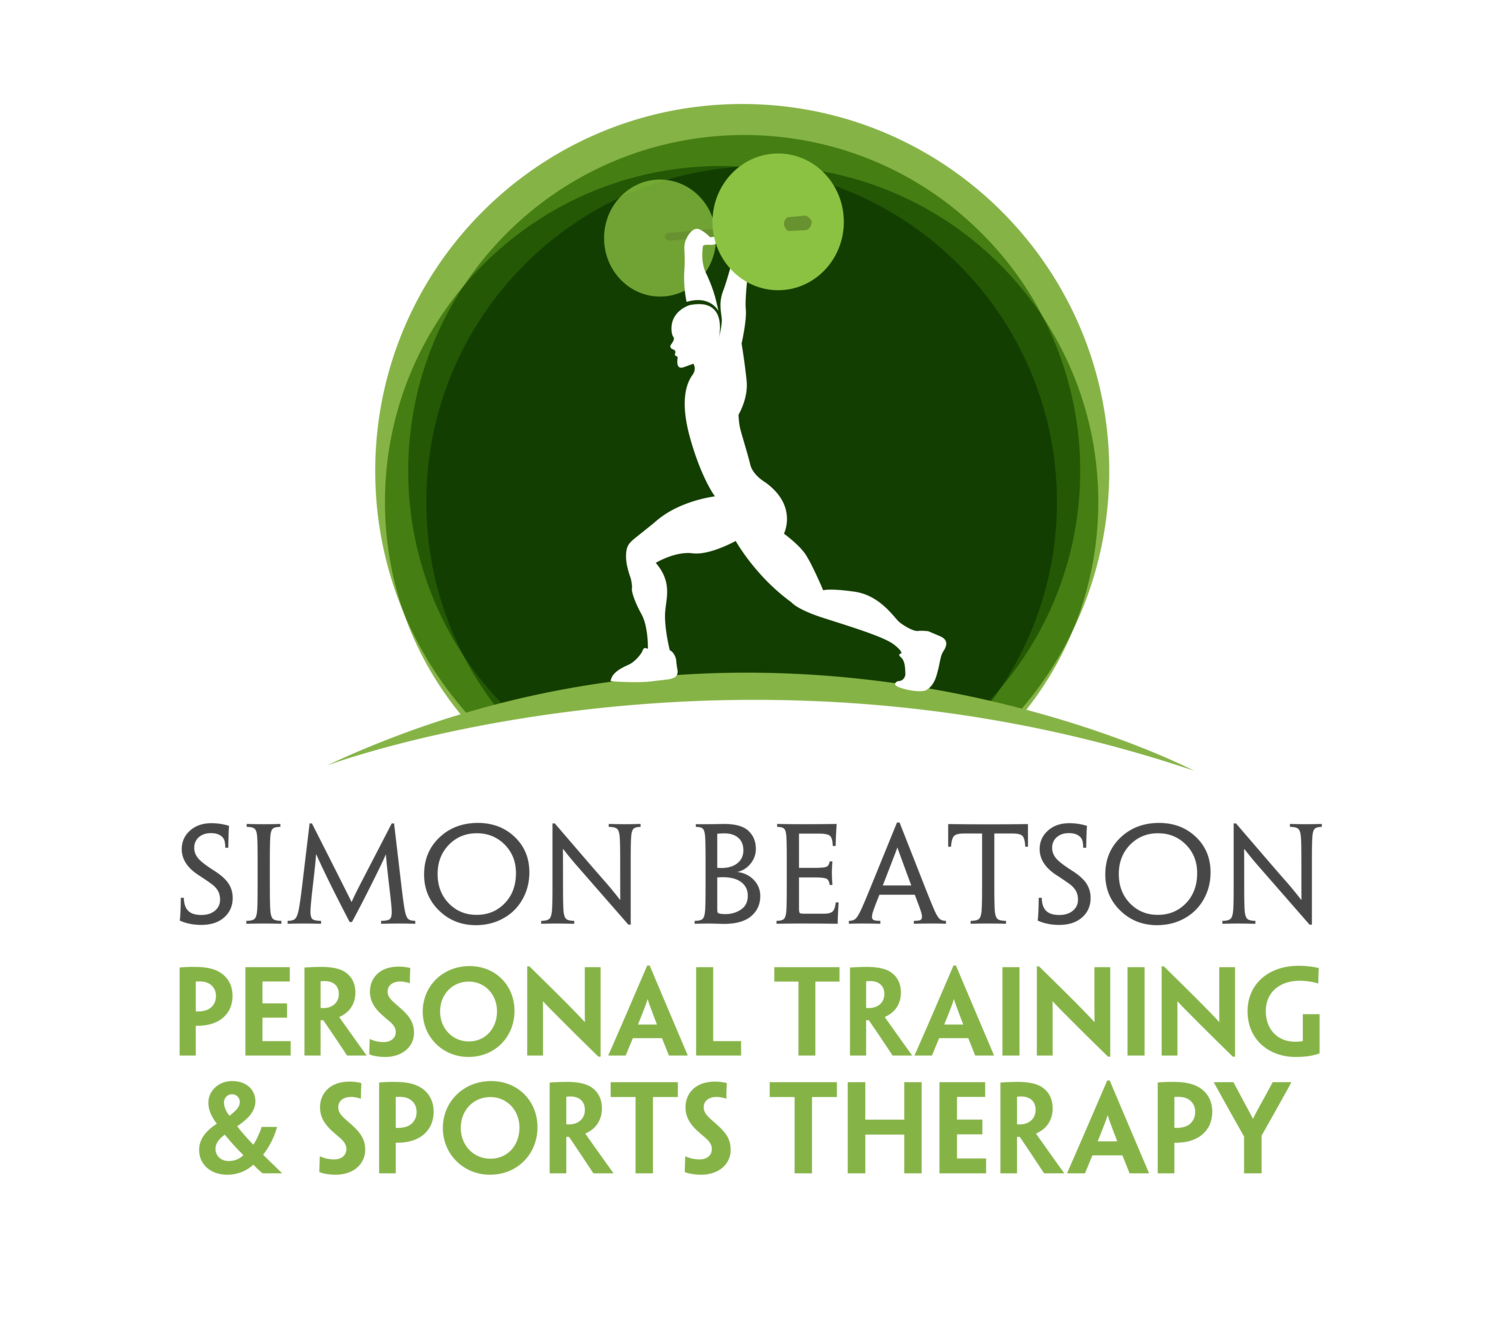 Simon Beatson Personal Training and Sports Therapy